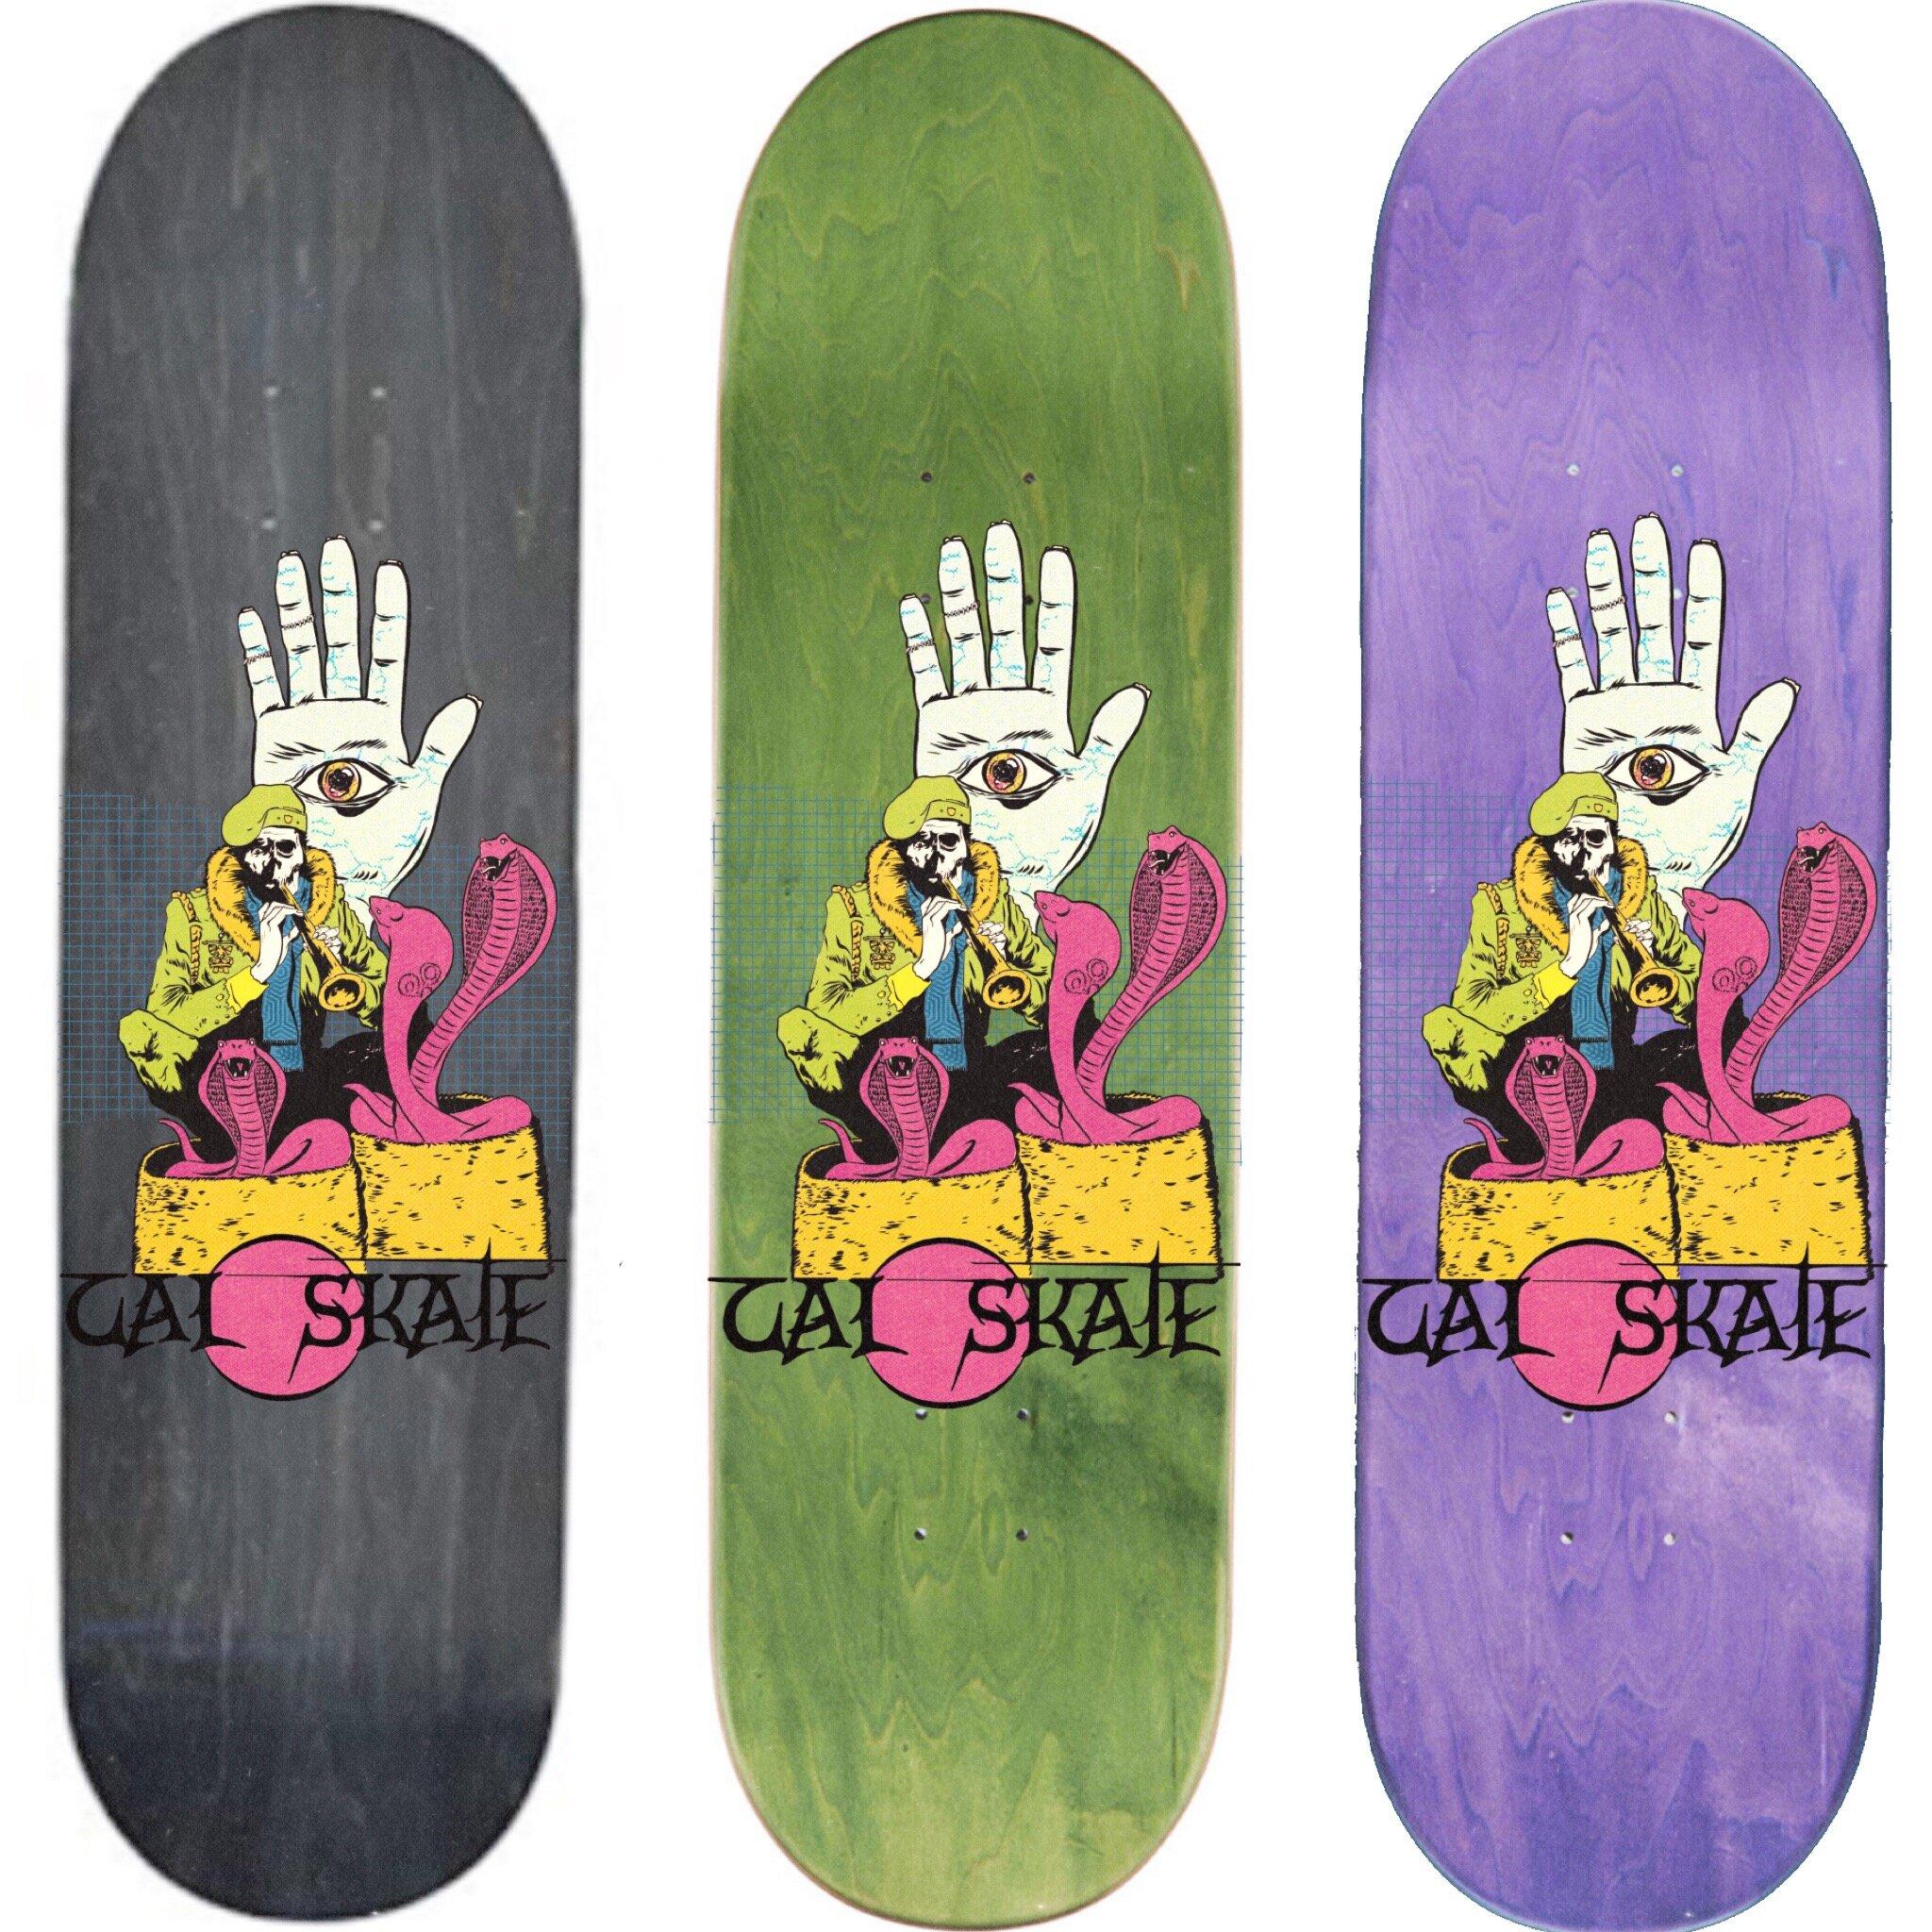 "Lure of the Occult" Assorted Sized Deck by Cal Skate